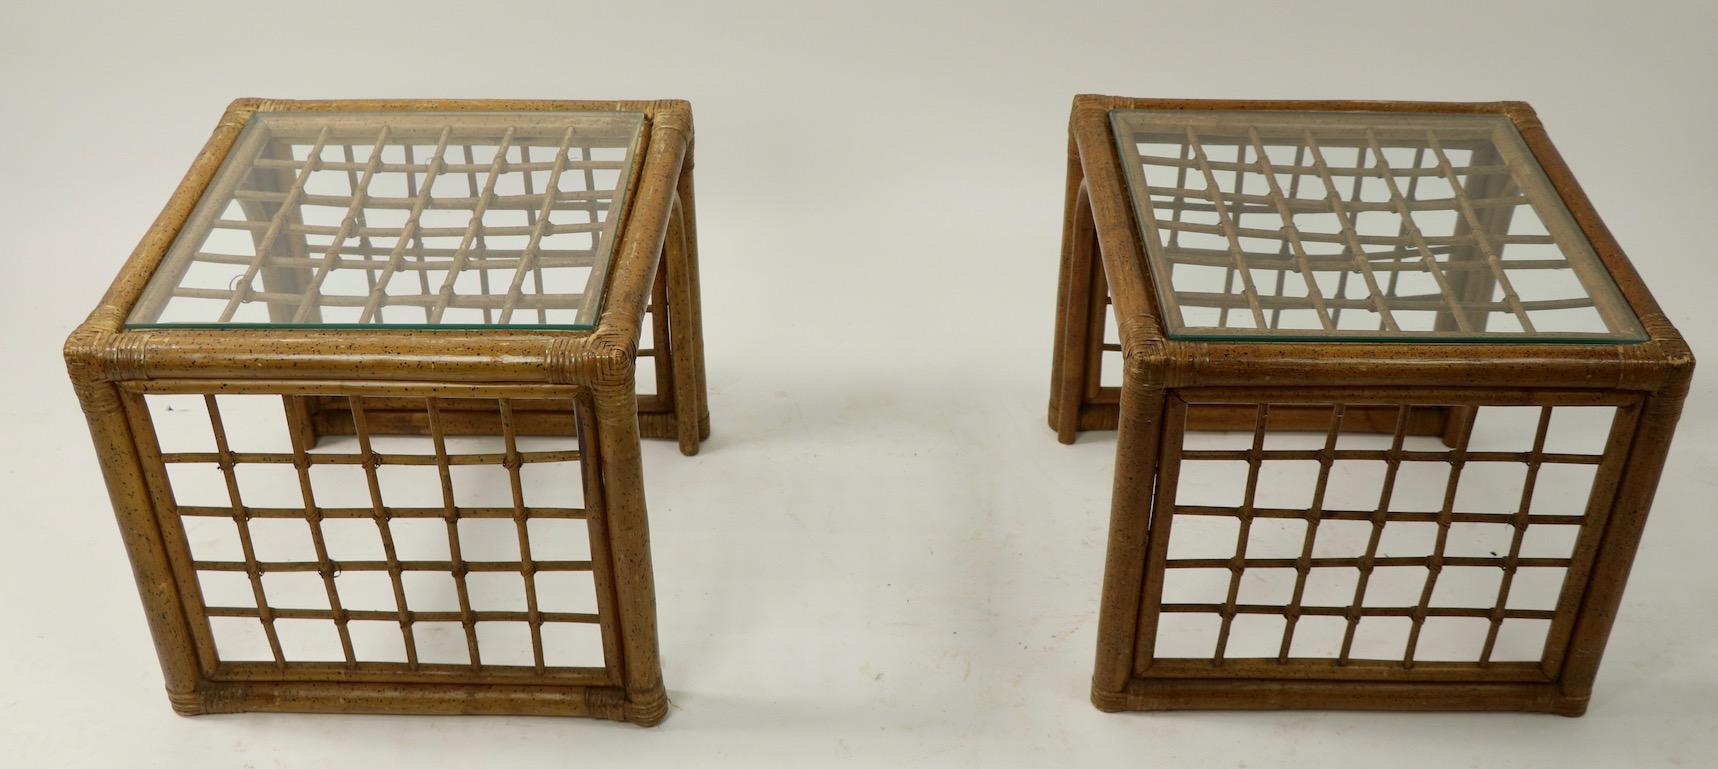 Pair of Bamboo and Glass Tables For Sale 7